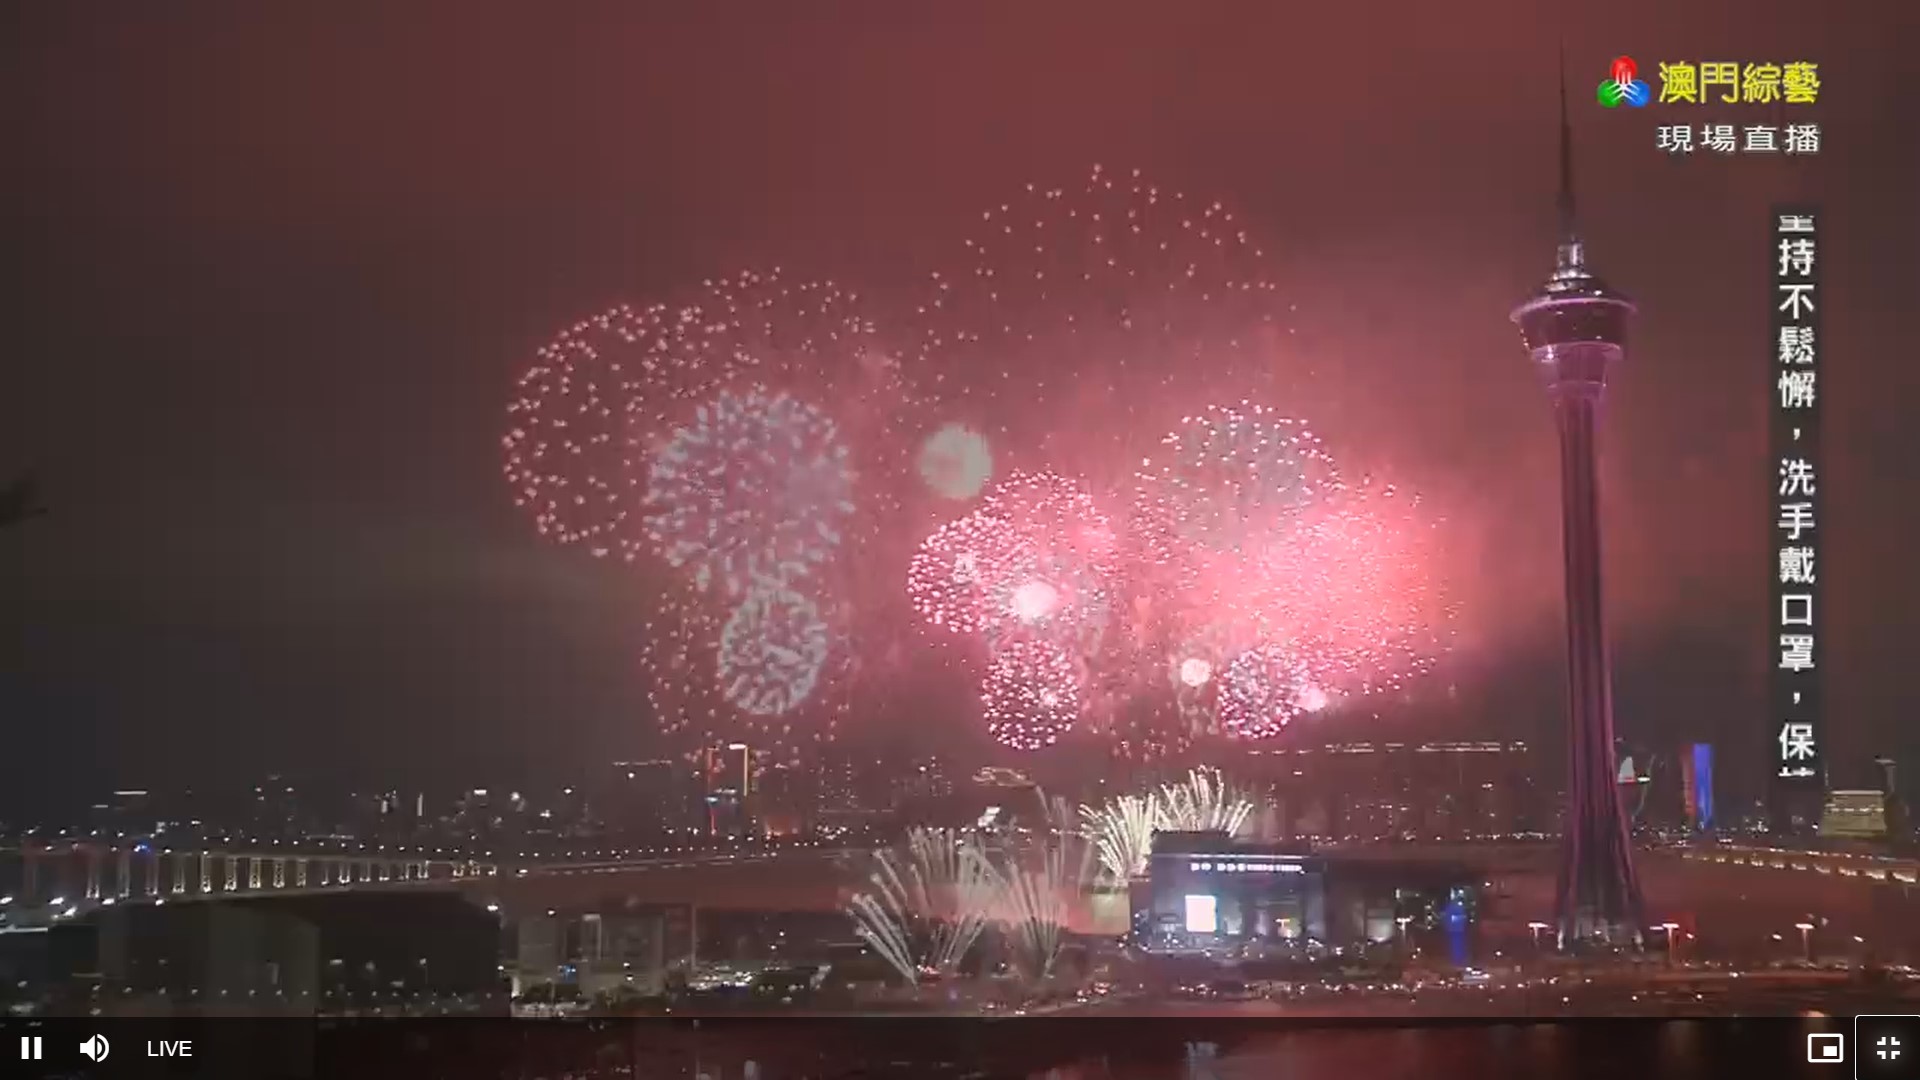 Macau National Day Fireworks Show 2020 on 1 October 2020